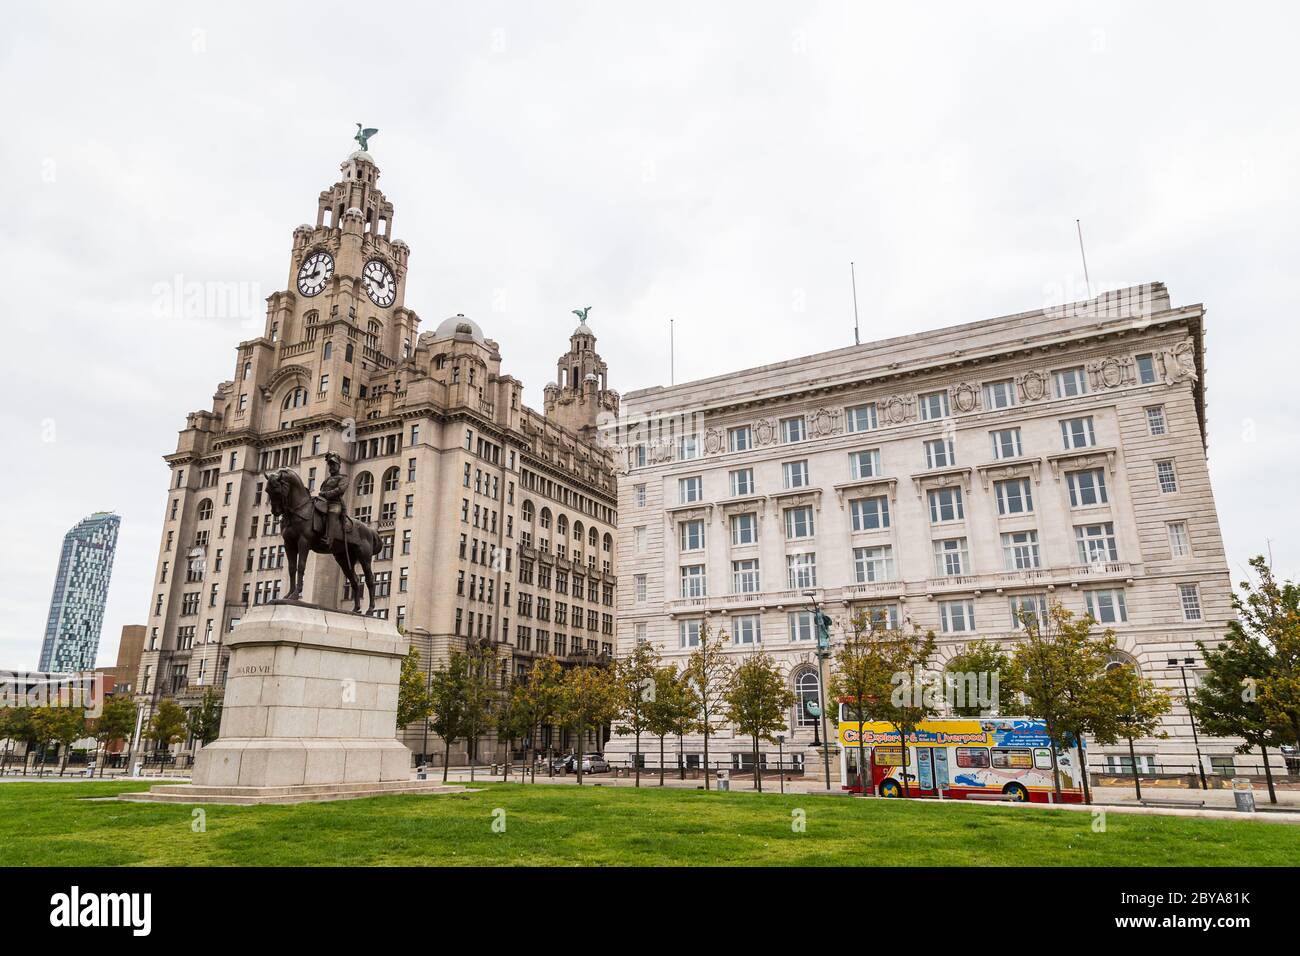 Statue of Edward VII on the Liverpool waterfront - captured in October 2015 in front of the Liver Building and Cunard Building. Stock Photo